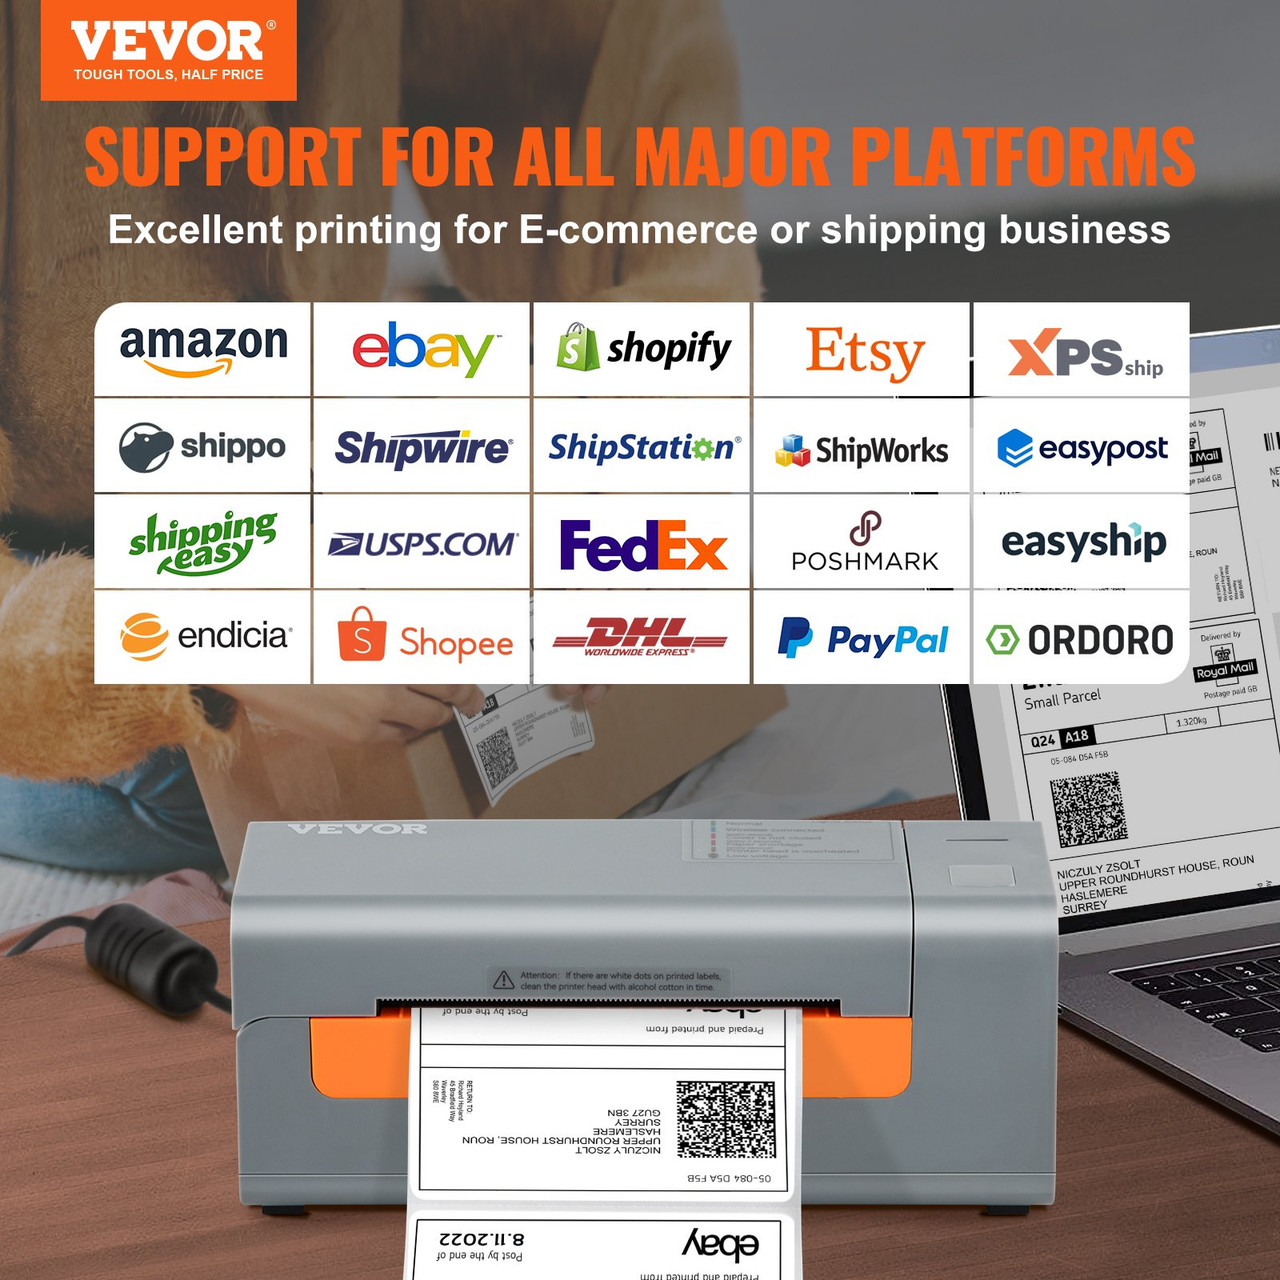 VEVOR HD(300DPI) Thermal Label Printer, Shipping Label Printer with Auto  Label Recognition, Support Windows/MacOS/Linux/Chromebook, Compatible with